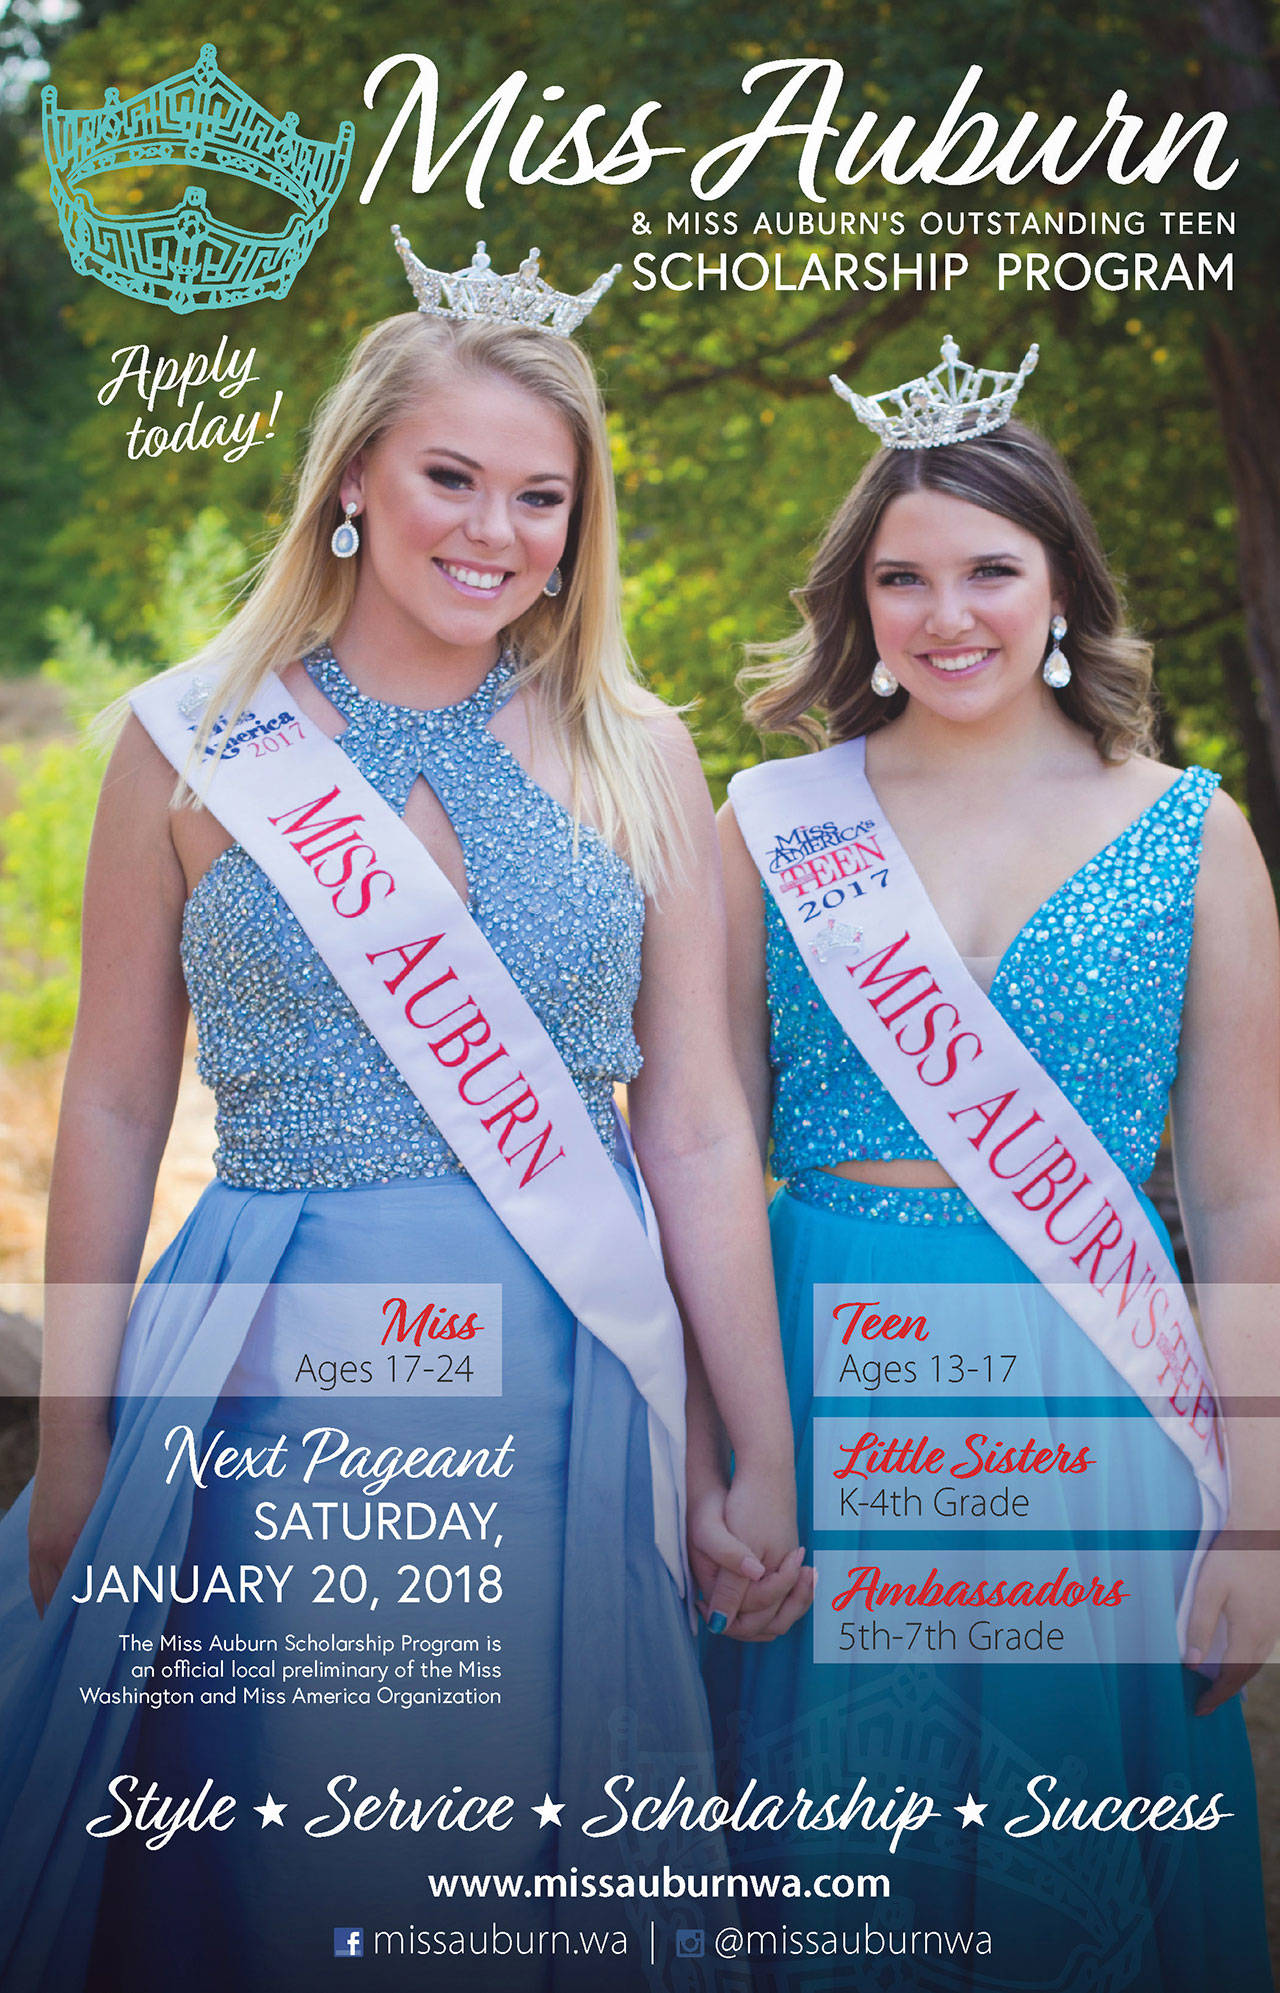 Contestants sought for Miss Auburn Miss and Auburn’s Outstanding Teen